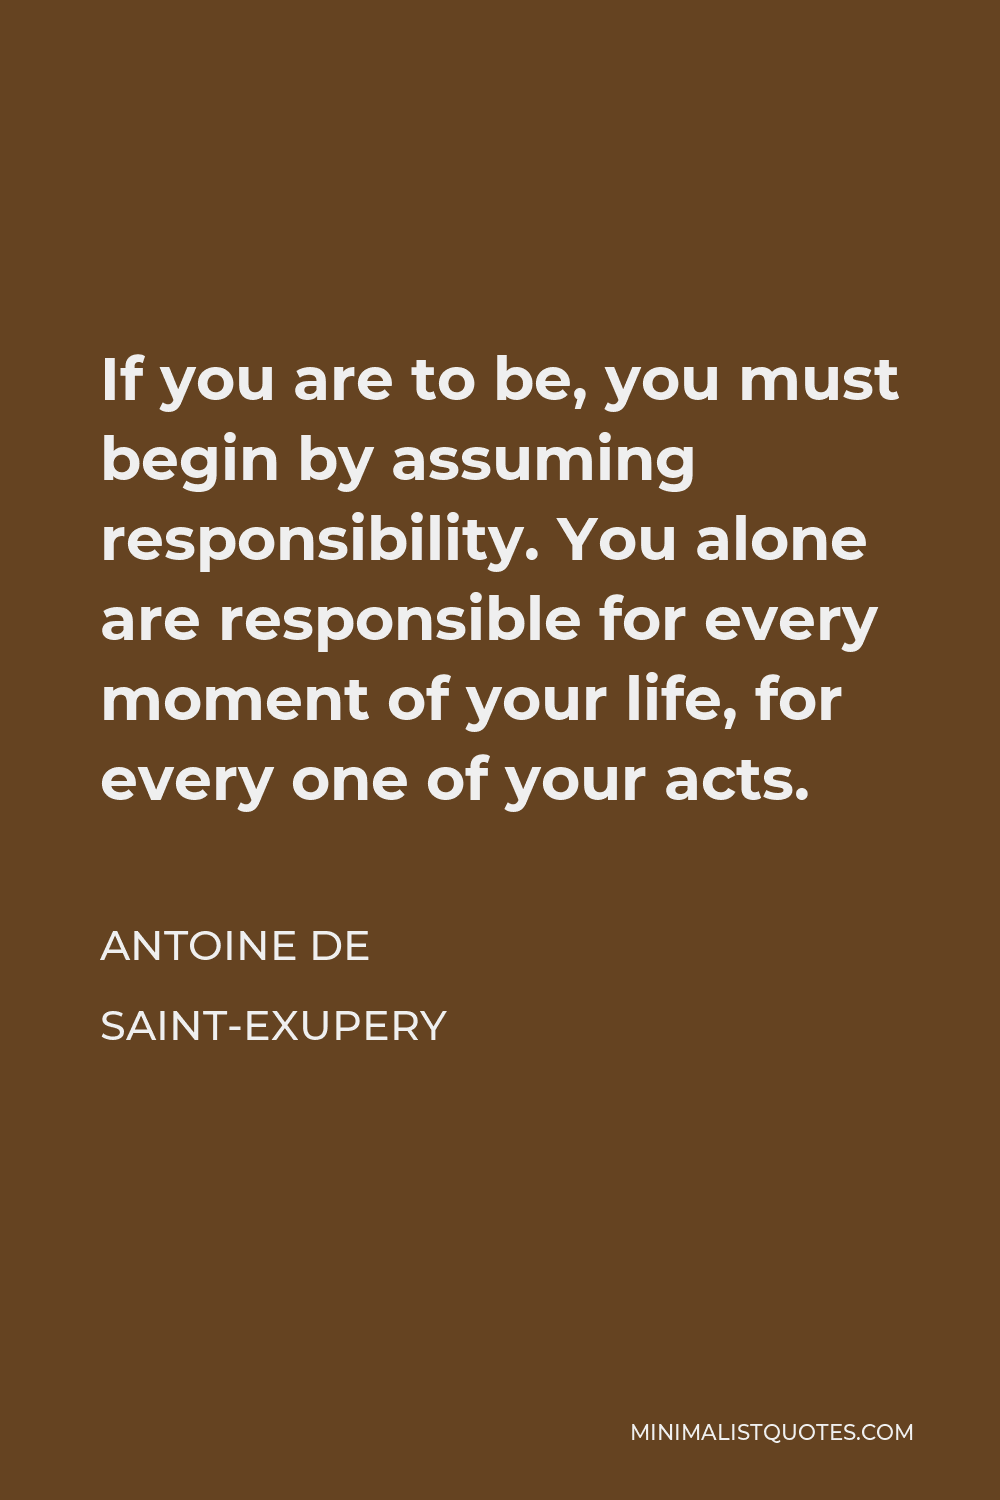 Antoine de Saint-Exupery Quote - If you are to be, you must begin by assuming responsibility. You alone are responsible for every moment of your life, for every one of your acts.